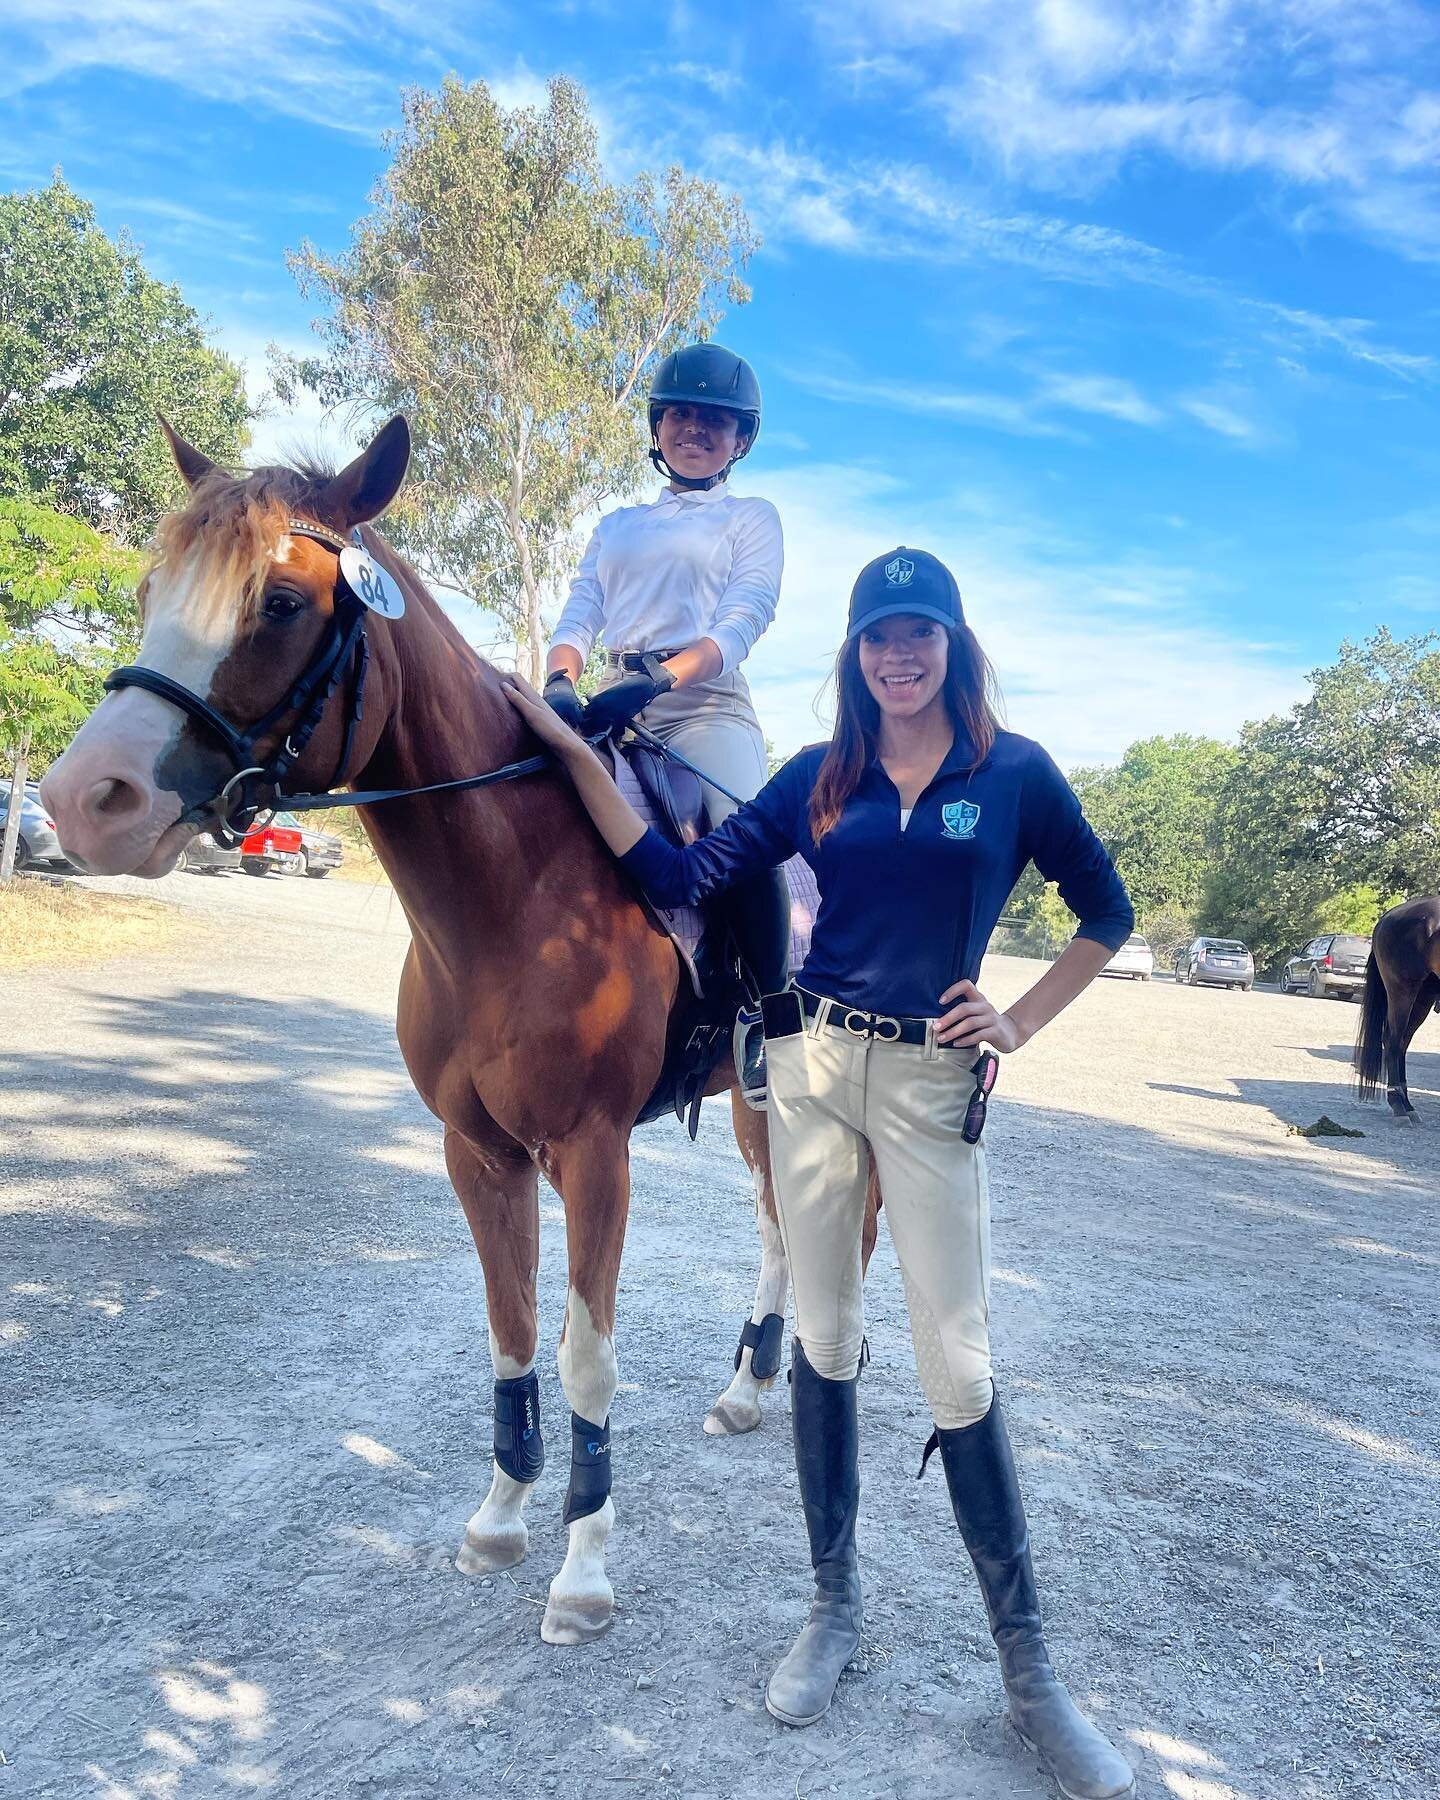 So proud of #saddleclub team member Xochi! Today was her first schooling show ever! She and Summer the pony did so amazing! Can&rsquo;t wait to see what&rsquo;s next for this duo😍